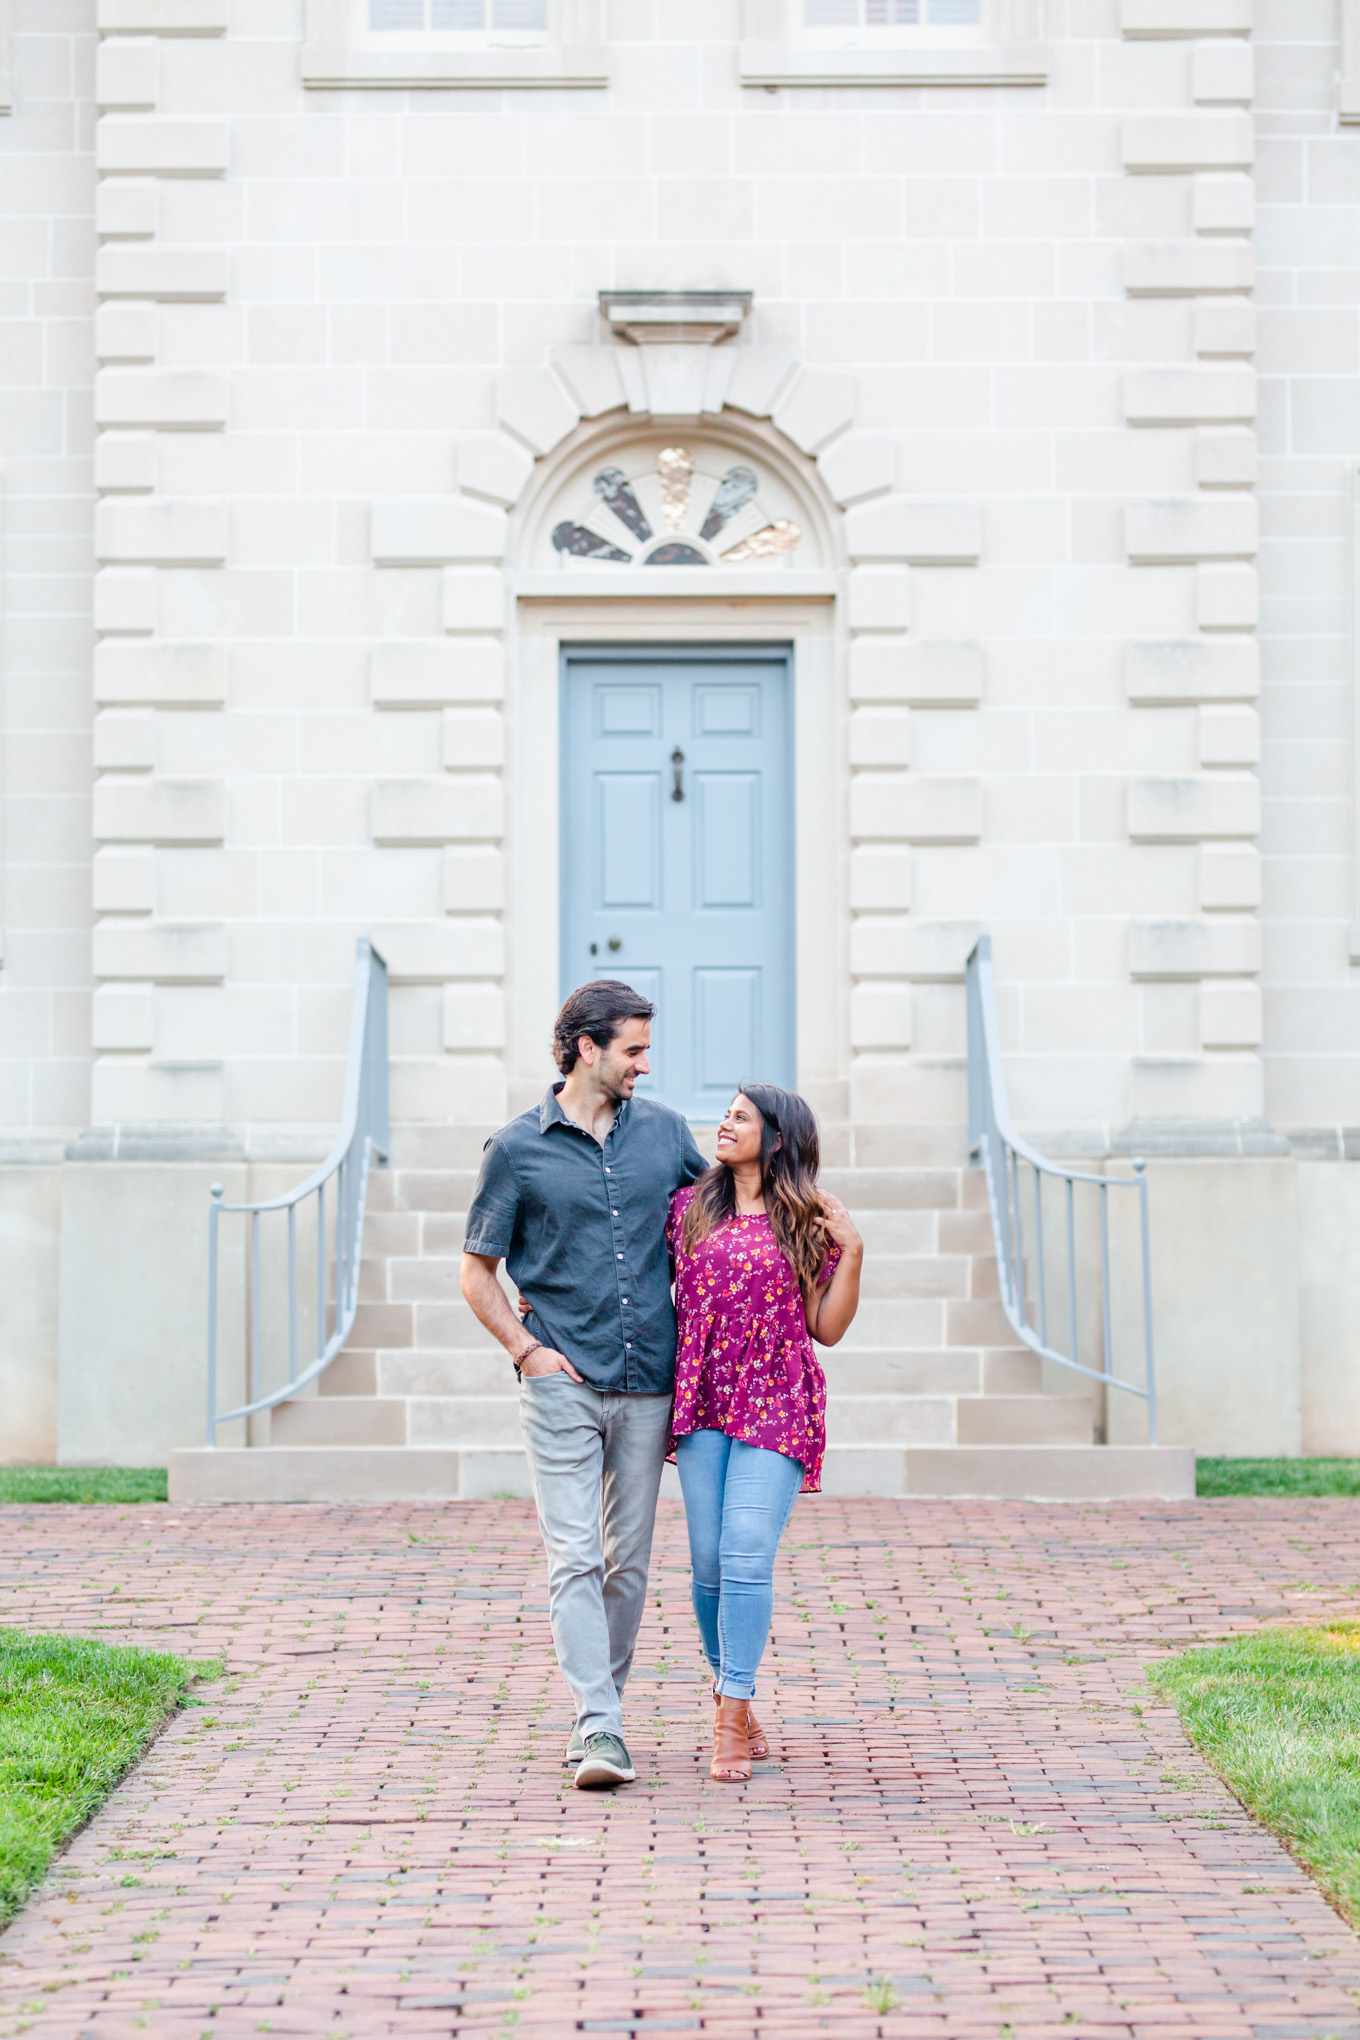 Old Town Alexandria engagement photos, Alexandria engagement photos, Old Town Alexandria photos, Old Town Alexandria, Alexandria engagement photos, Alexandria Virginia, classic engagement photos, historic town engagement photos, engagement photos, Rachel E.H. Photography, Carlyle House